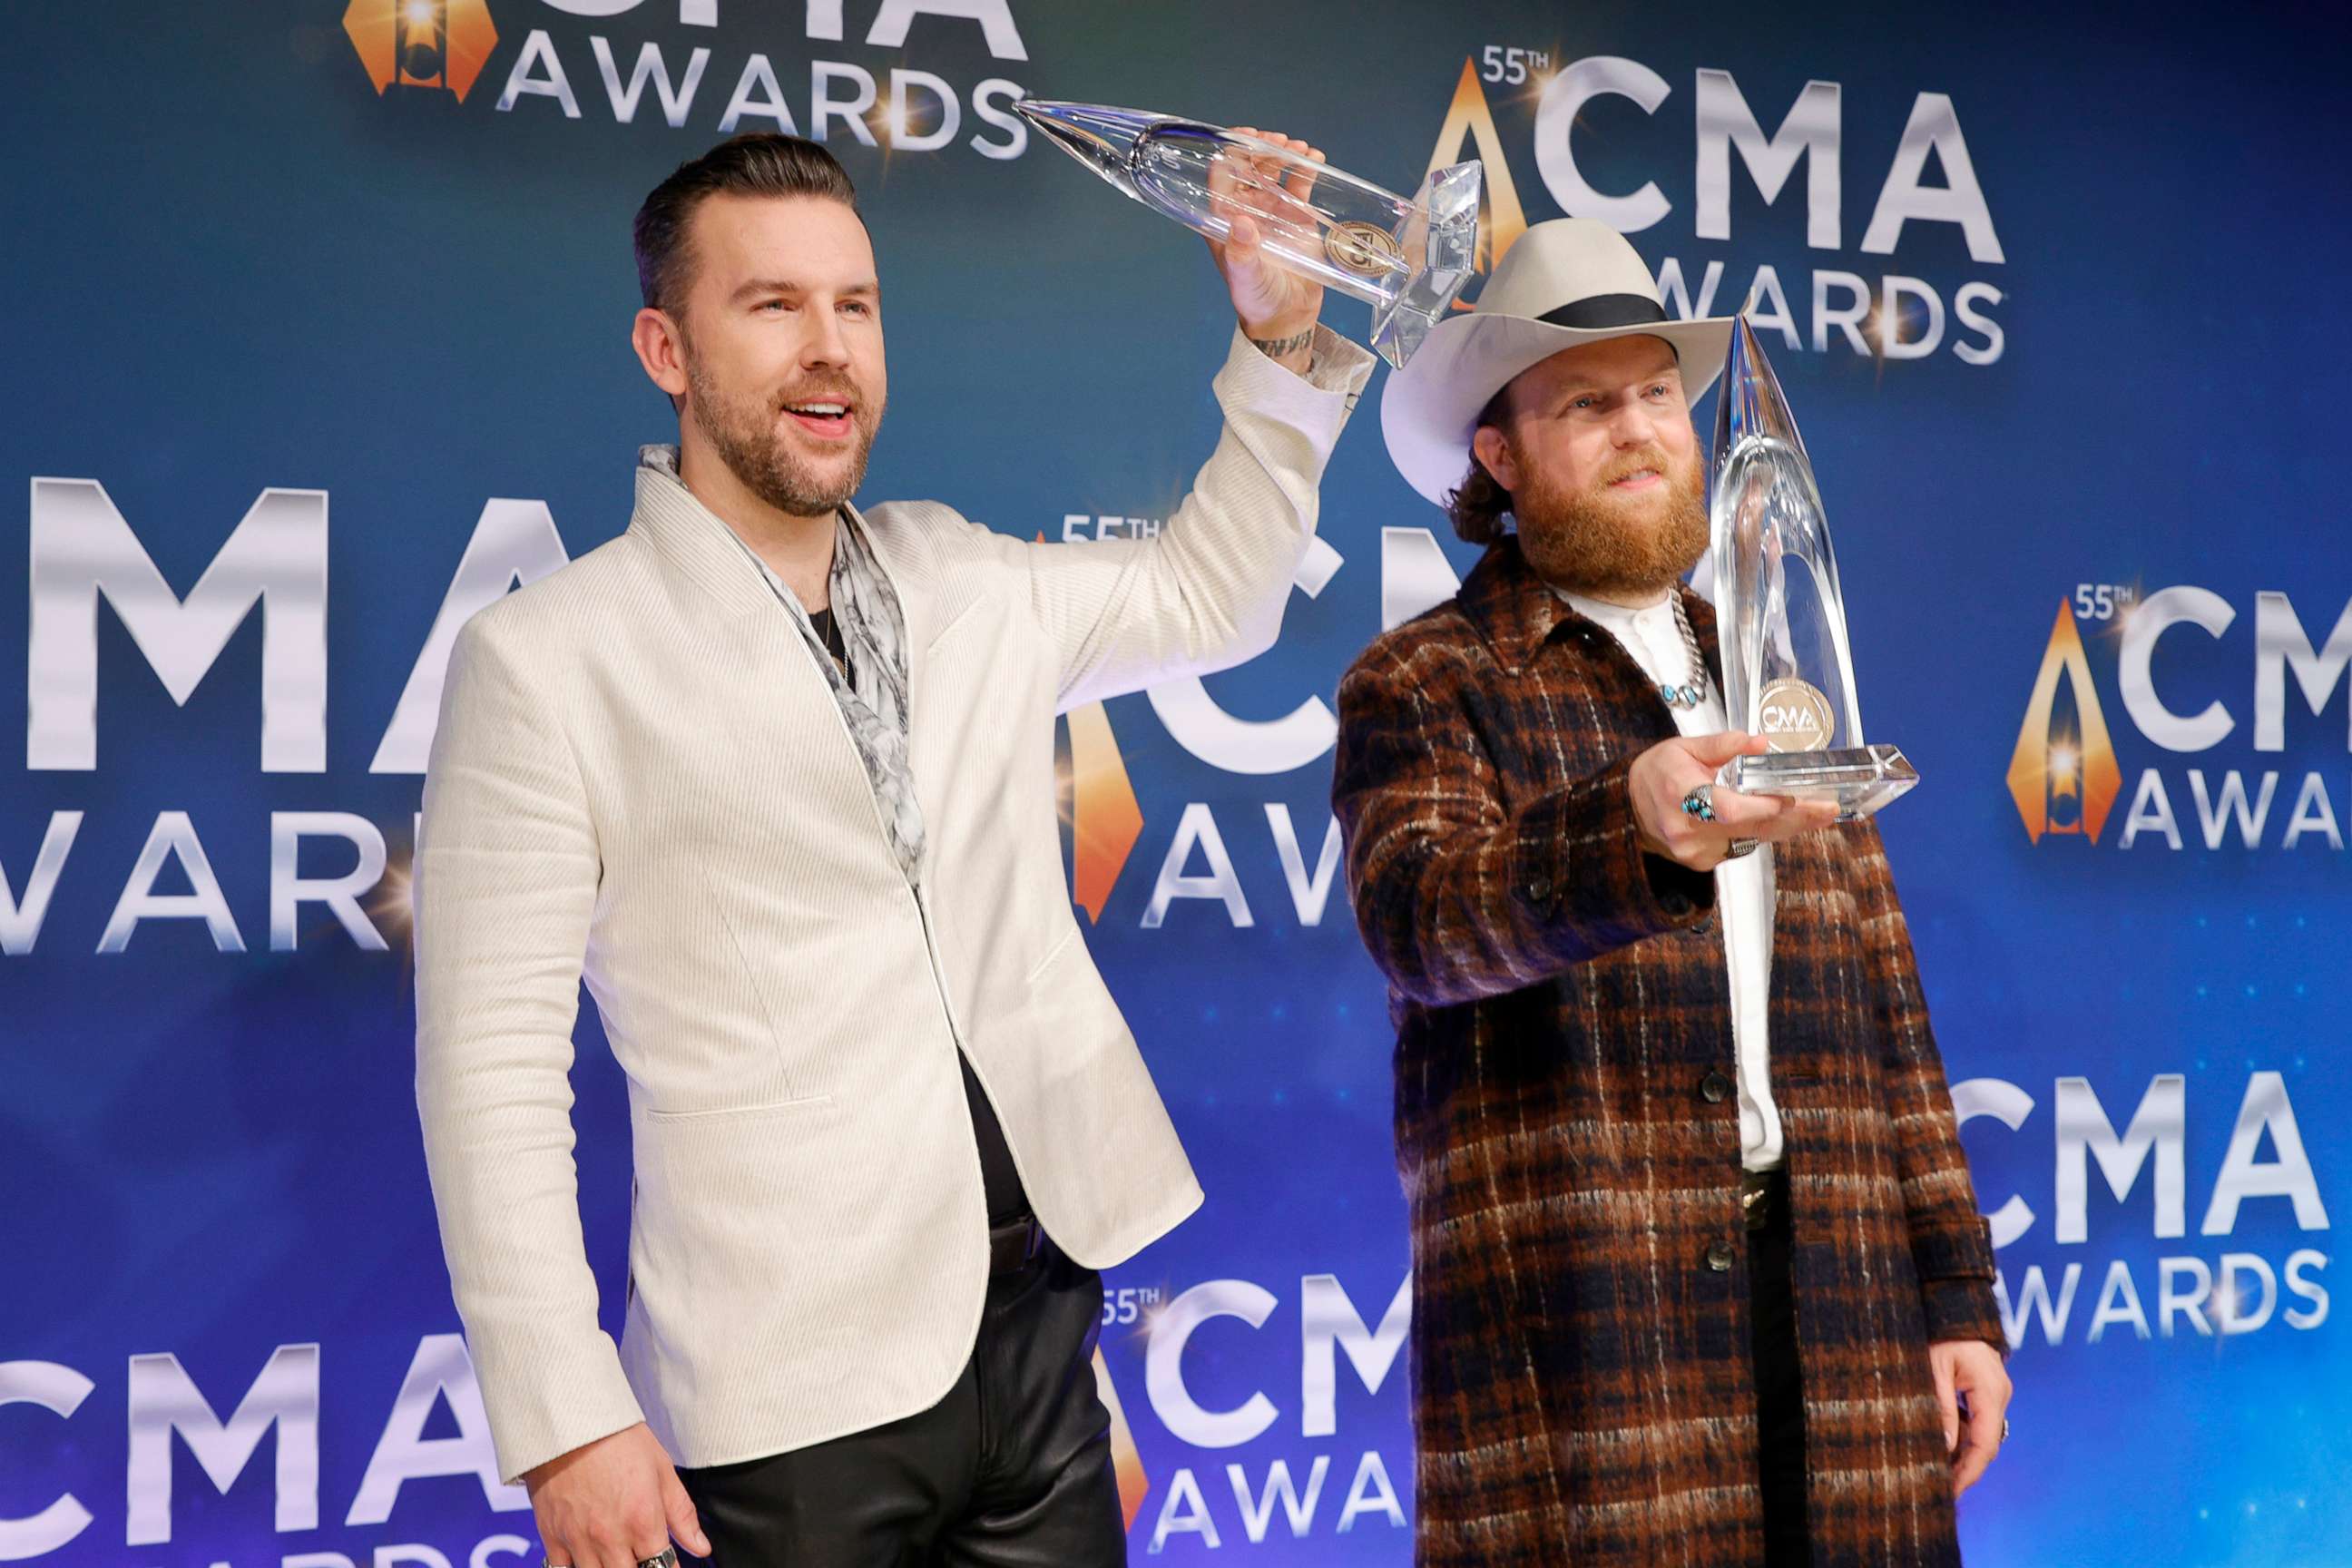 PHOTO: T.J. Osborne and John Osborne of Brothers Osborne pose with their awards for the 55th annual Country Music Association awards in Nashville, Tenn., Nov. 10. 2021.